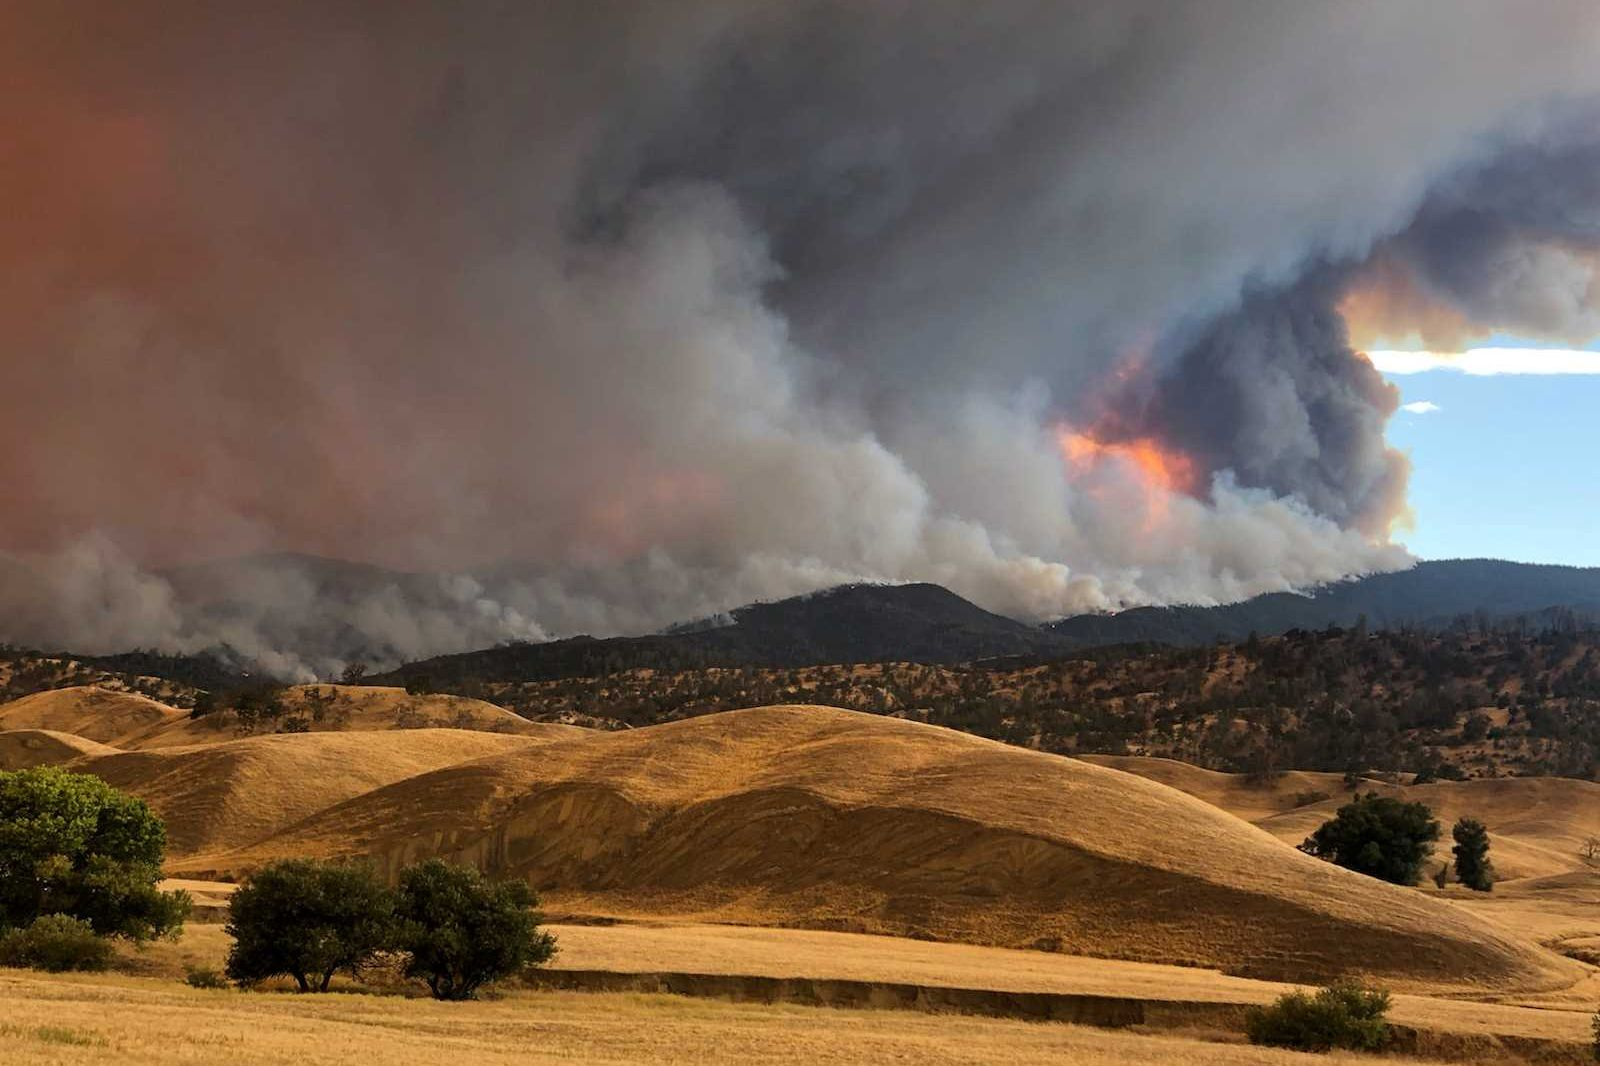 Oregon prepares for 'mass fatality incident' as fires continue to ravage West Coast